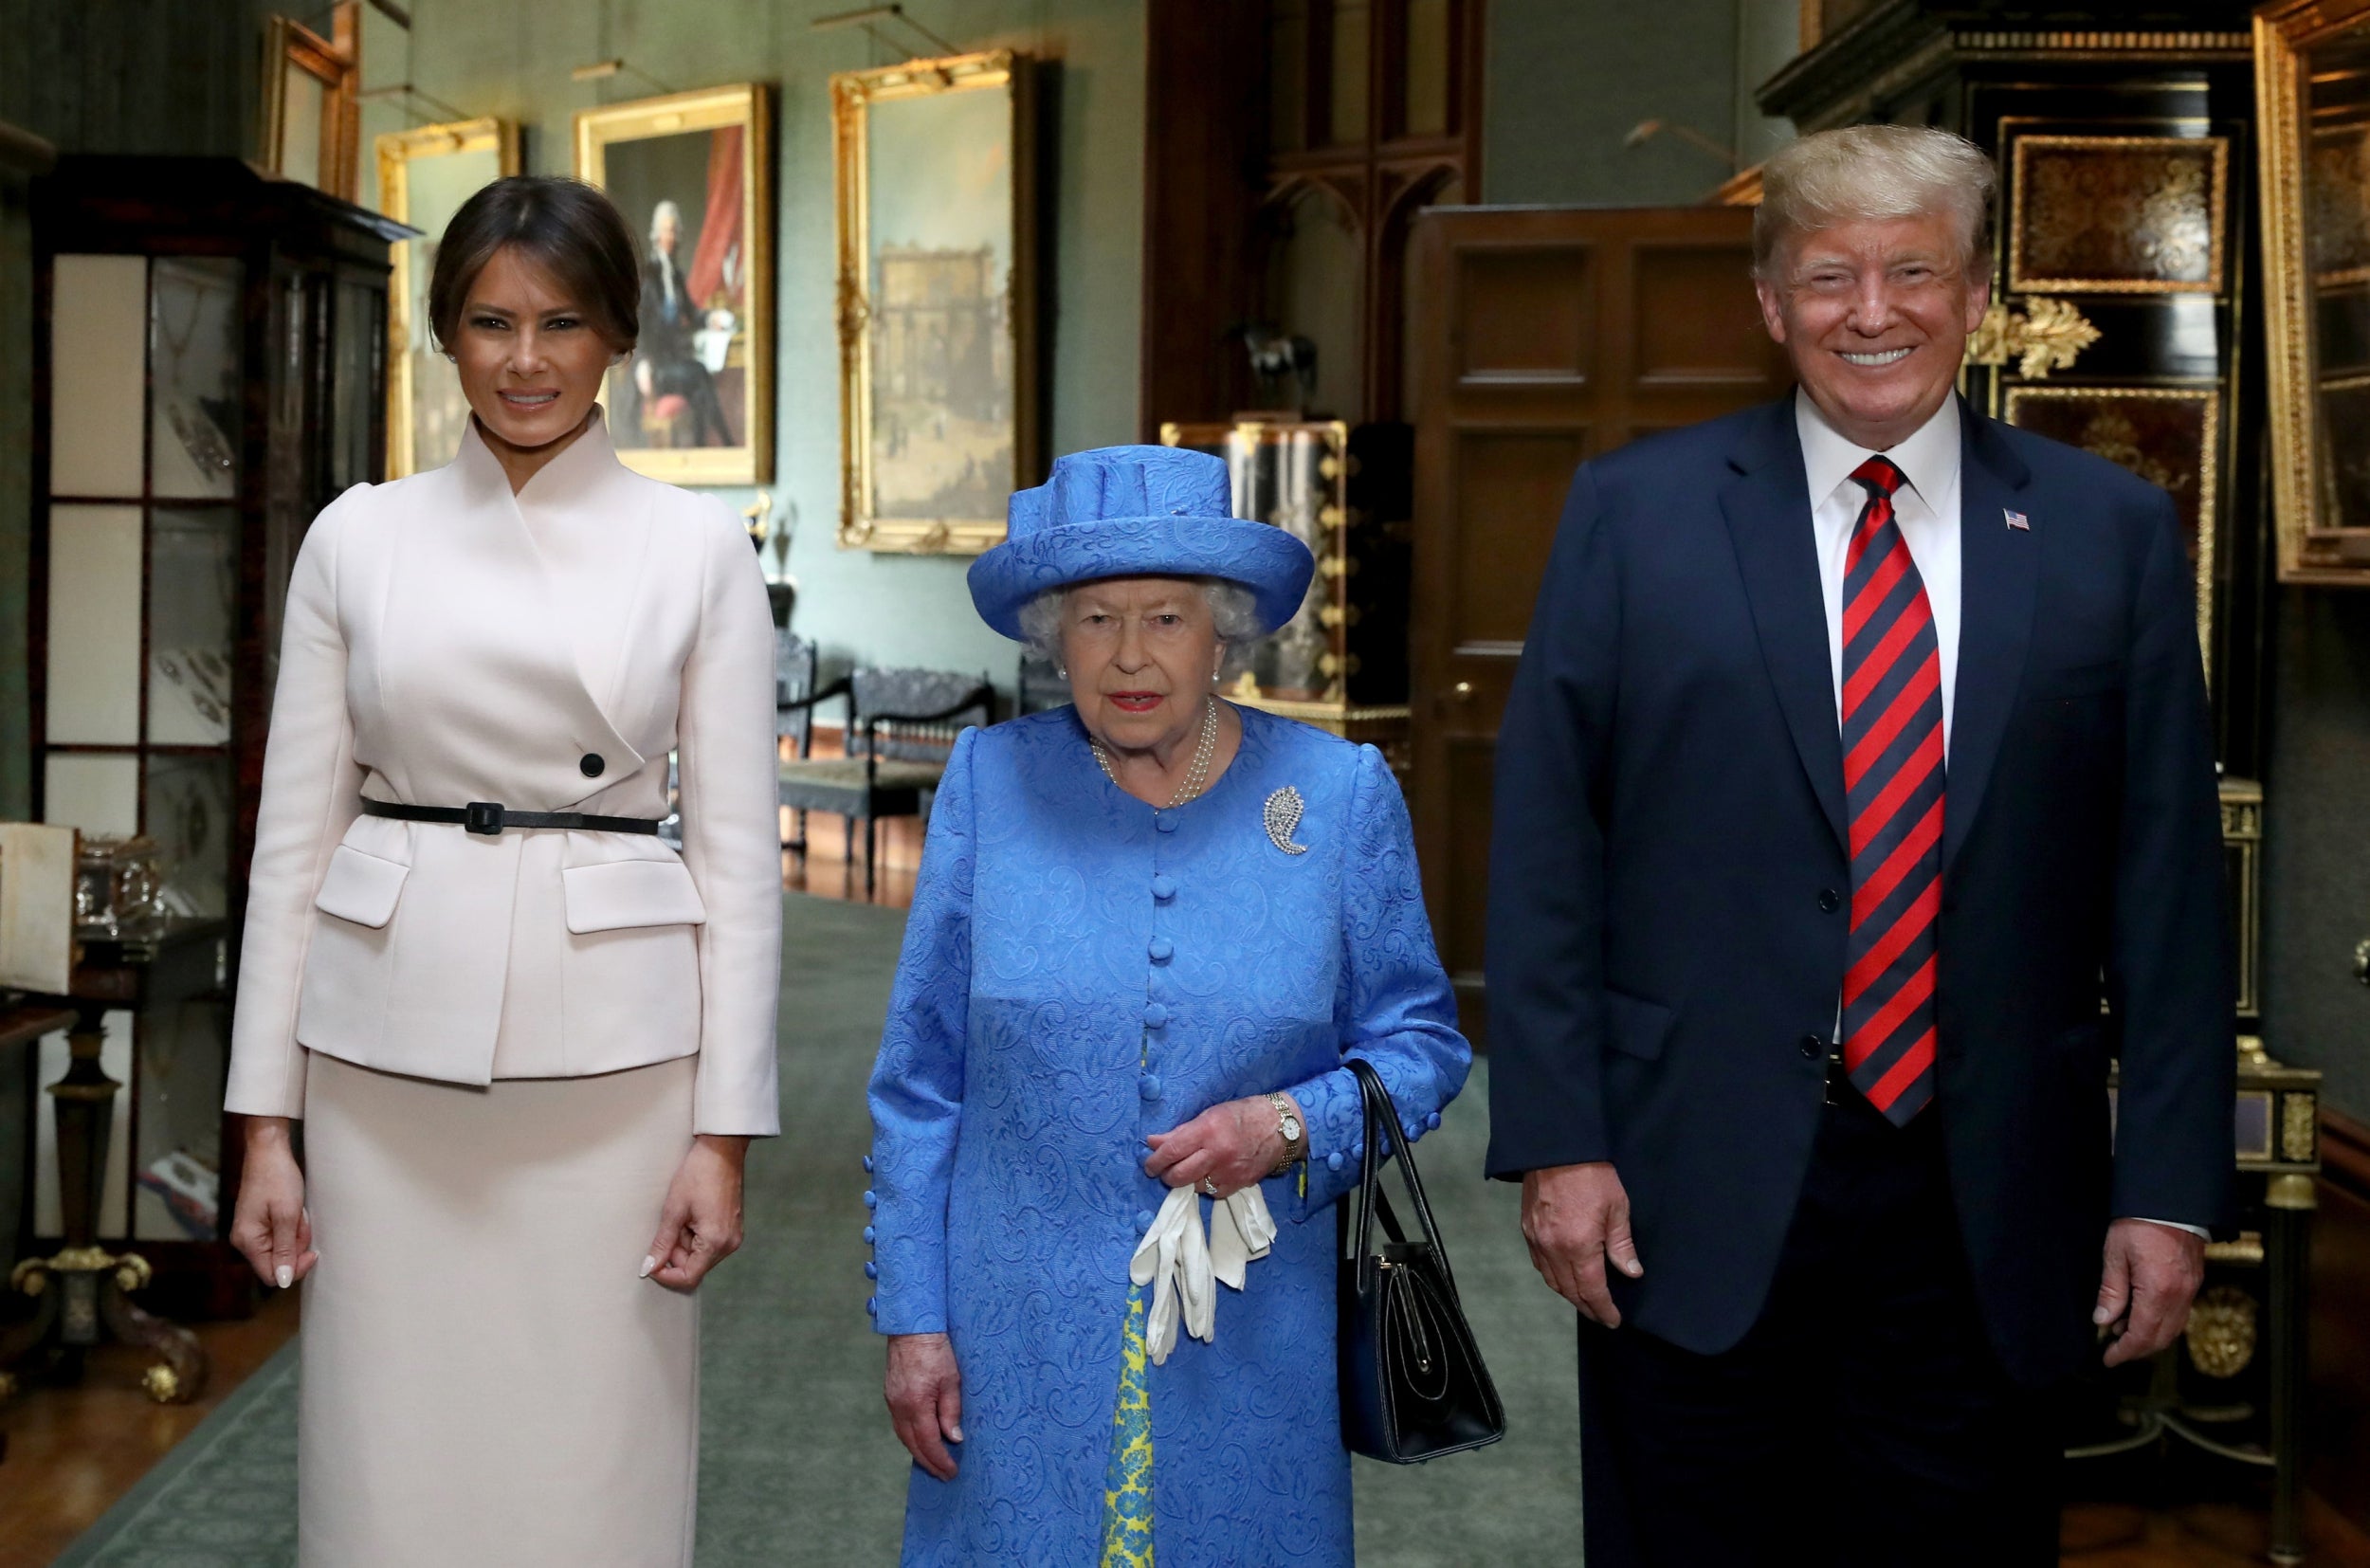 The US president and first lady smiled for photographs with the Queen at Windsor Castle